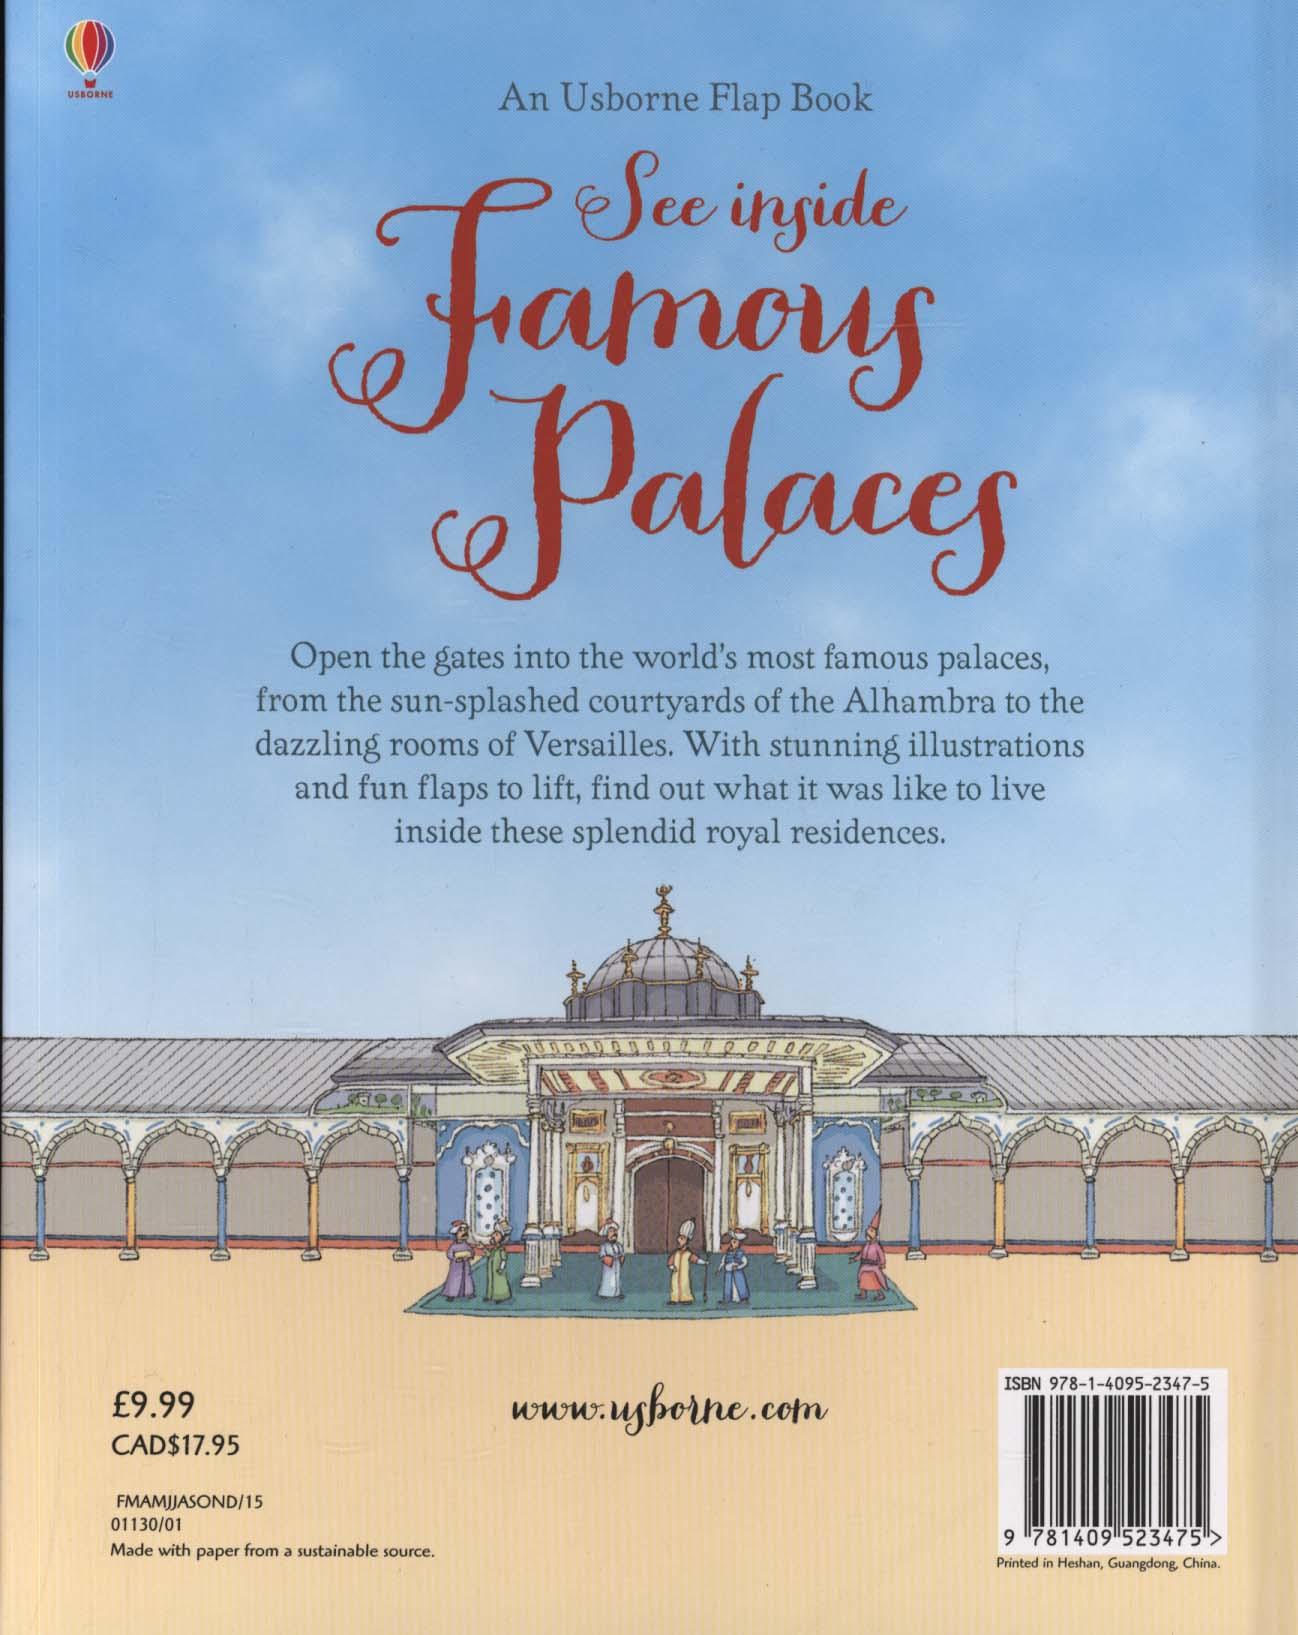 See Inside Famous Palaces